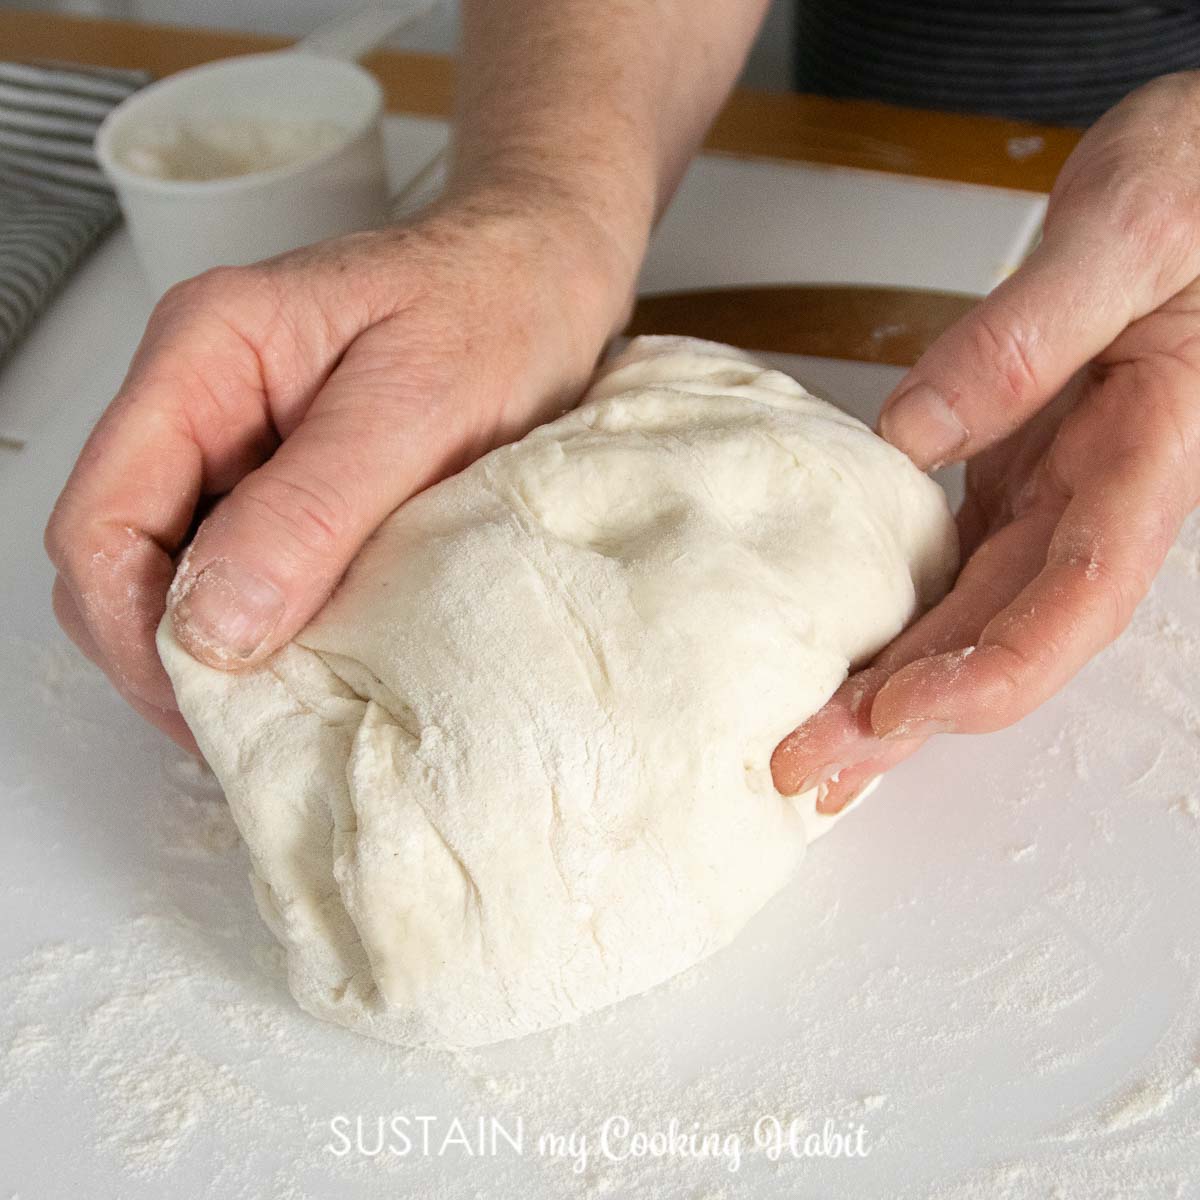 Hands kneading pizza dough.